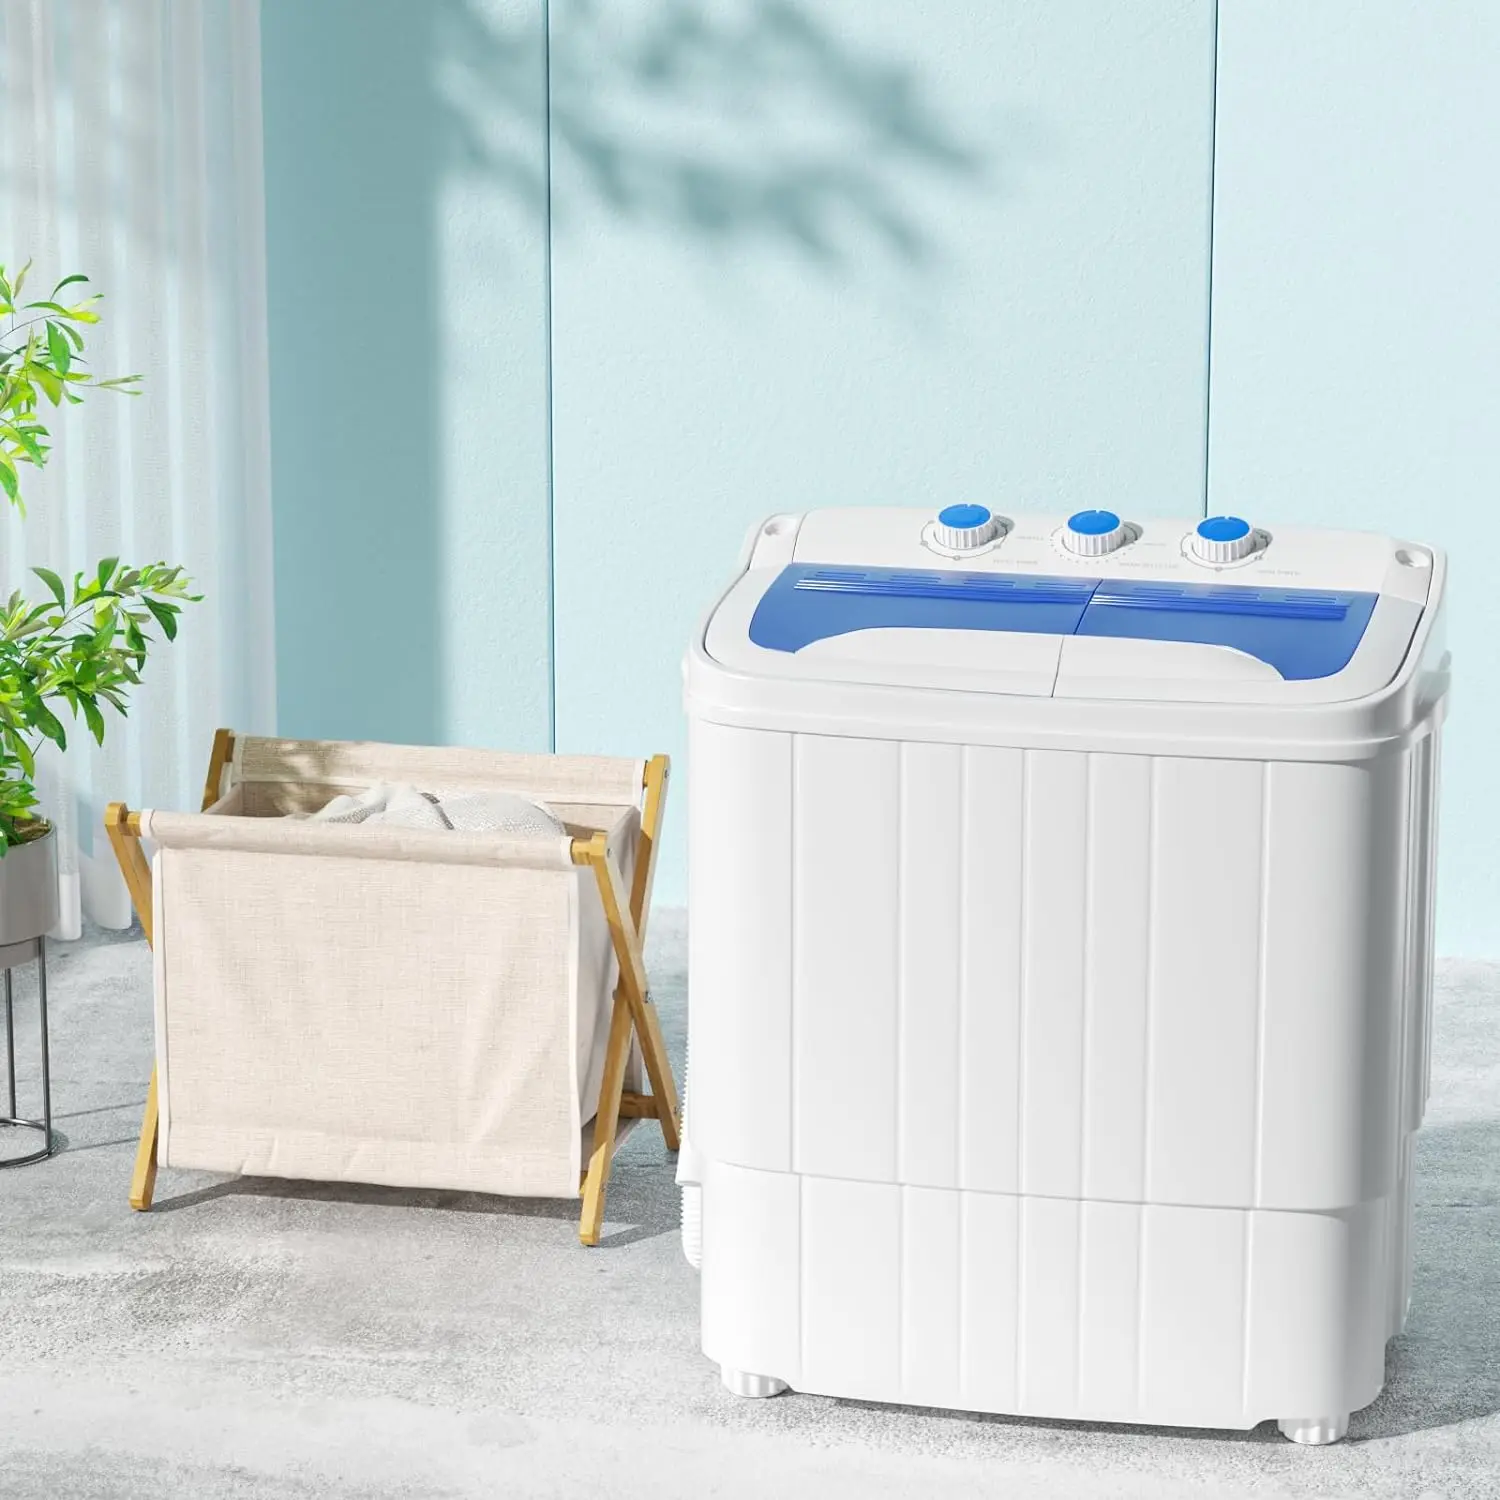 INTERGREAT Portable Waher and Dryer, 14.5 lbs Mini Small Washing Machine Combo with Spin Dryer, Compact Twin Tub Laundry Washer